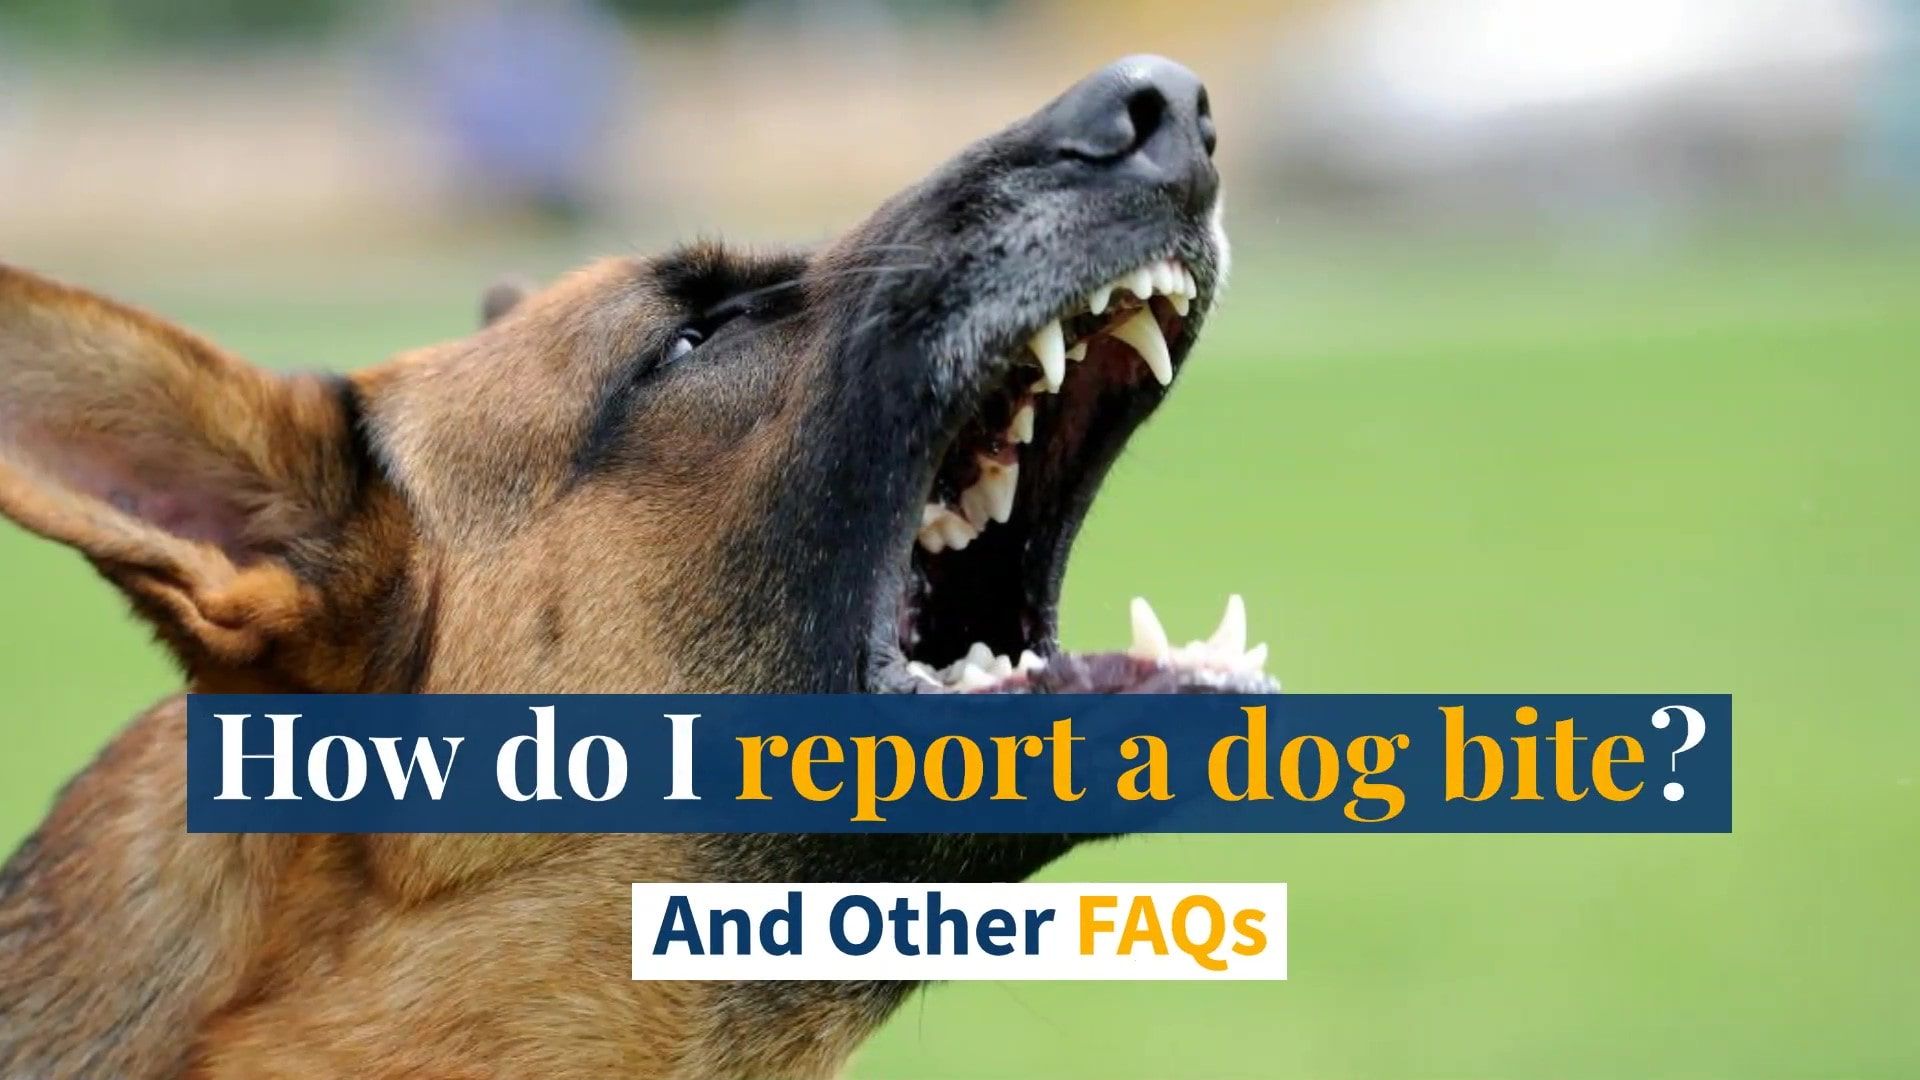 how long do you have to report a dog bite